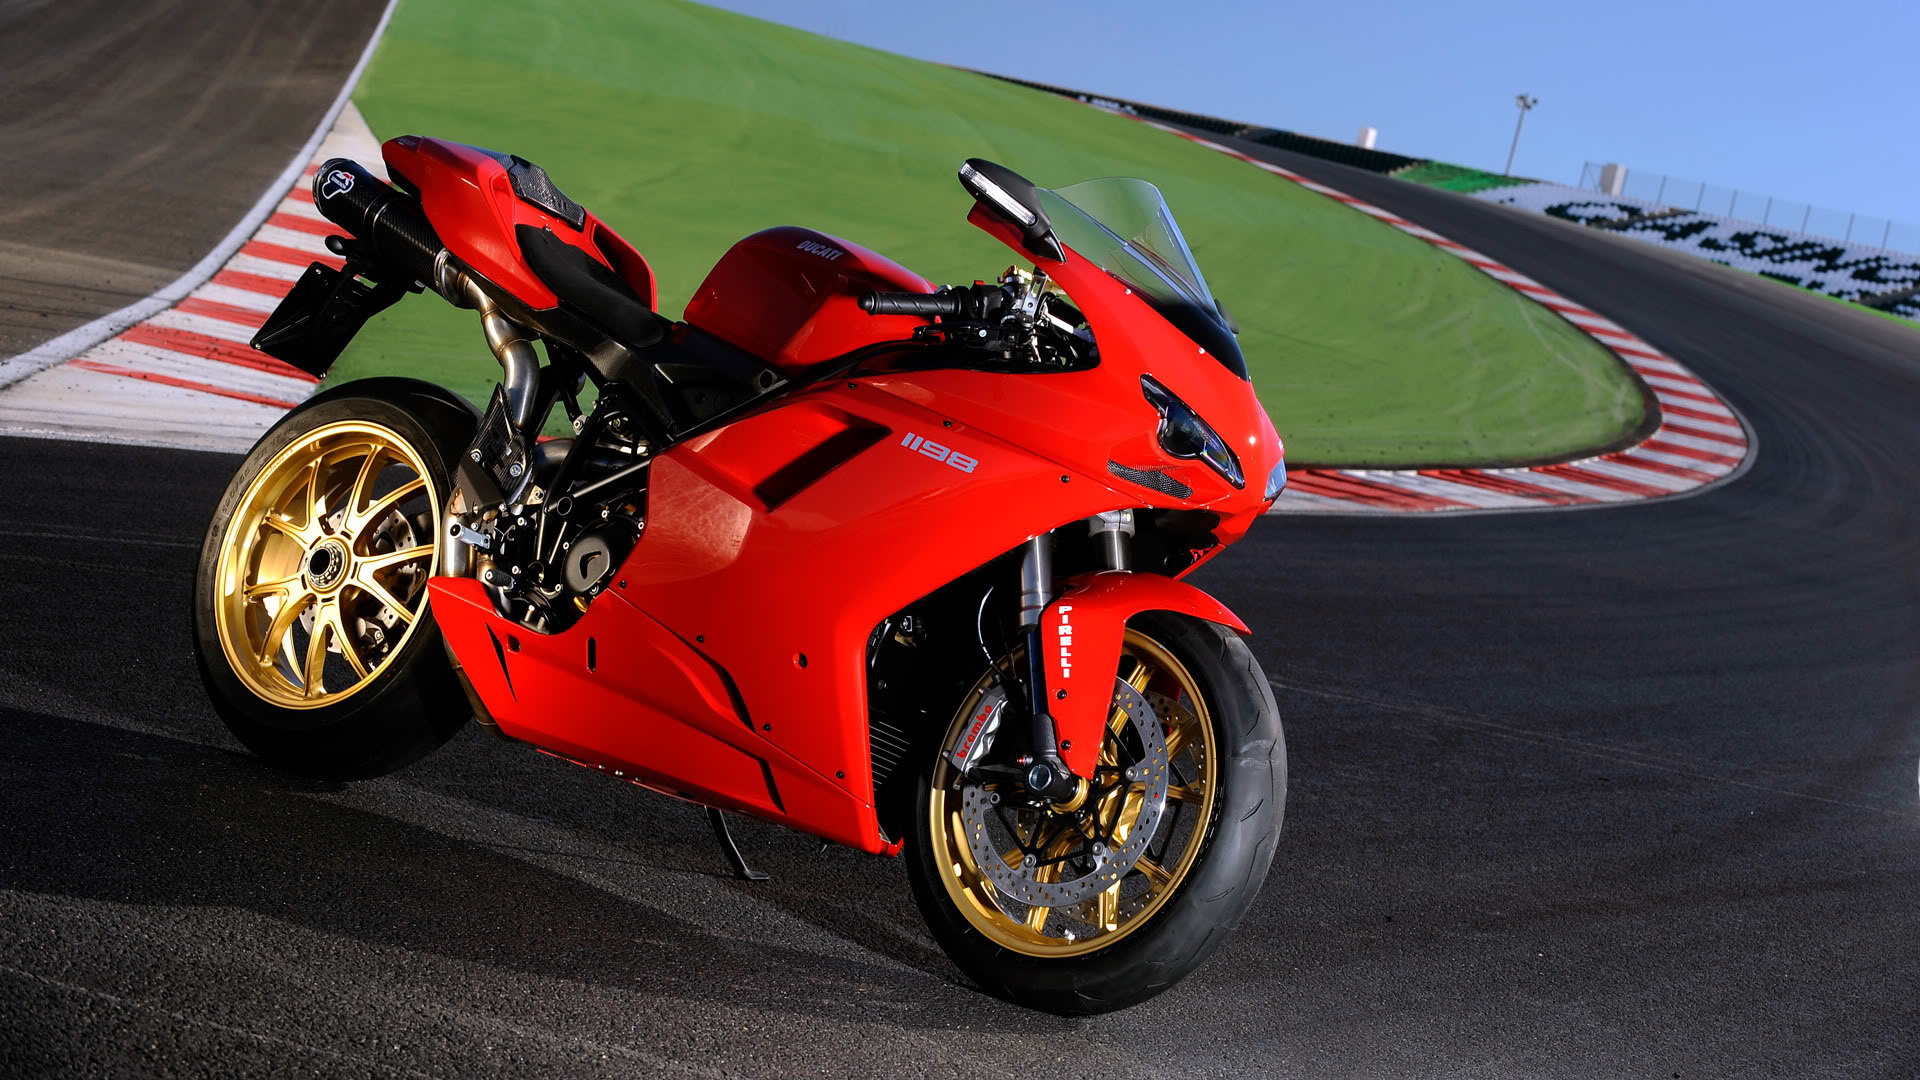 HQ Ducati 1198 Background Images